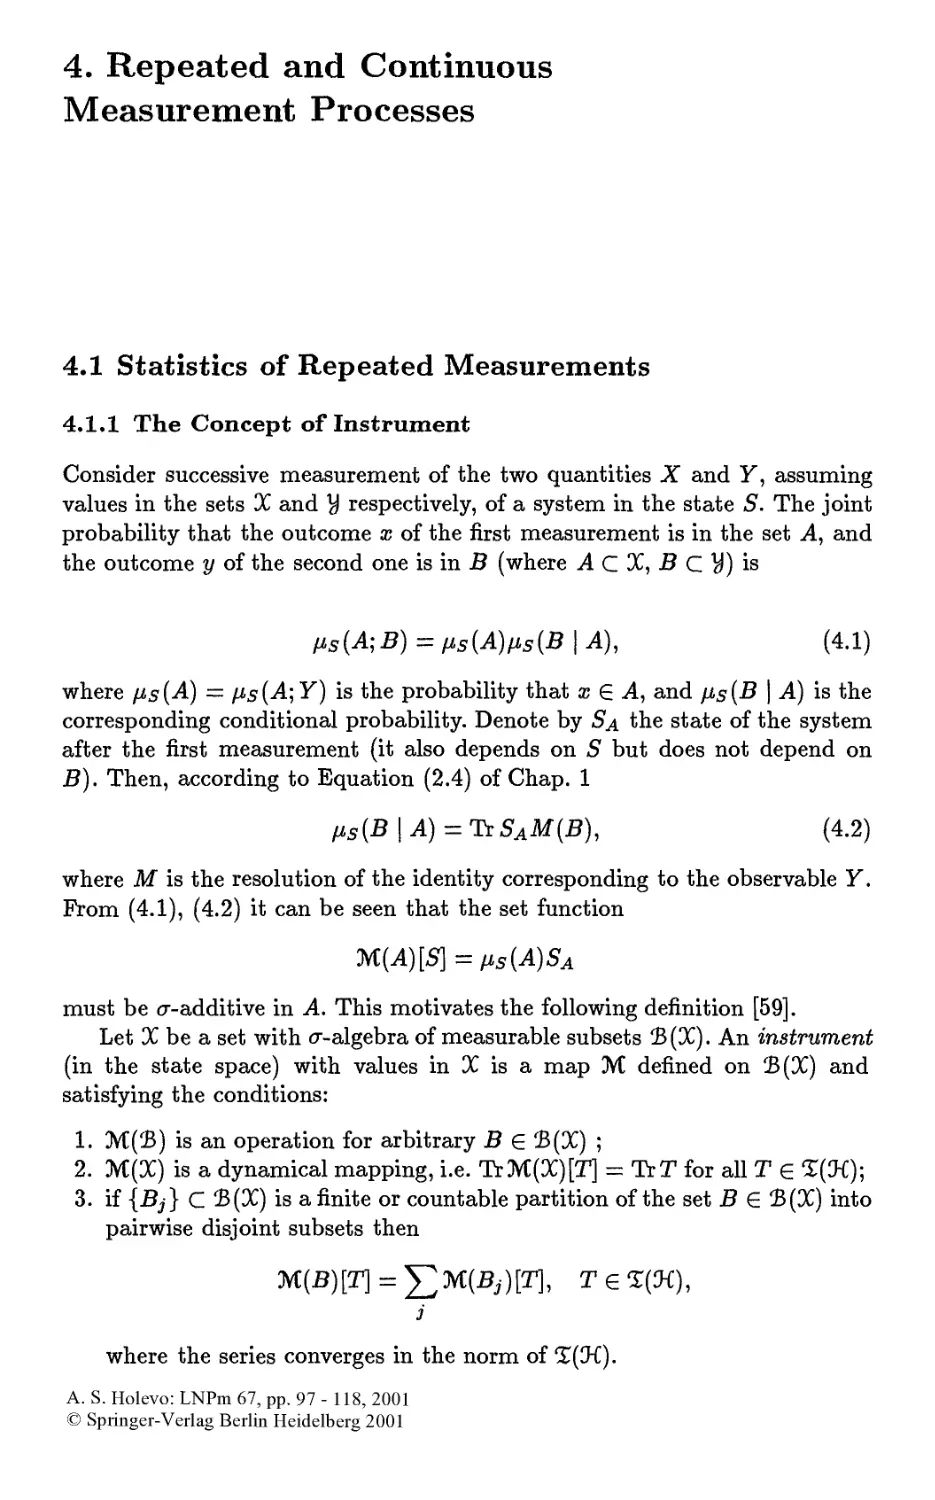 4. Repeated and Continuous Measurement Processes